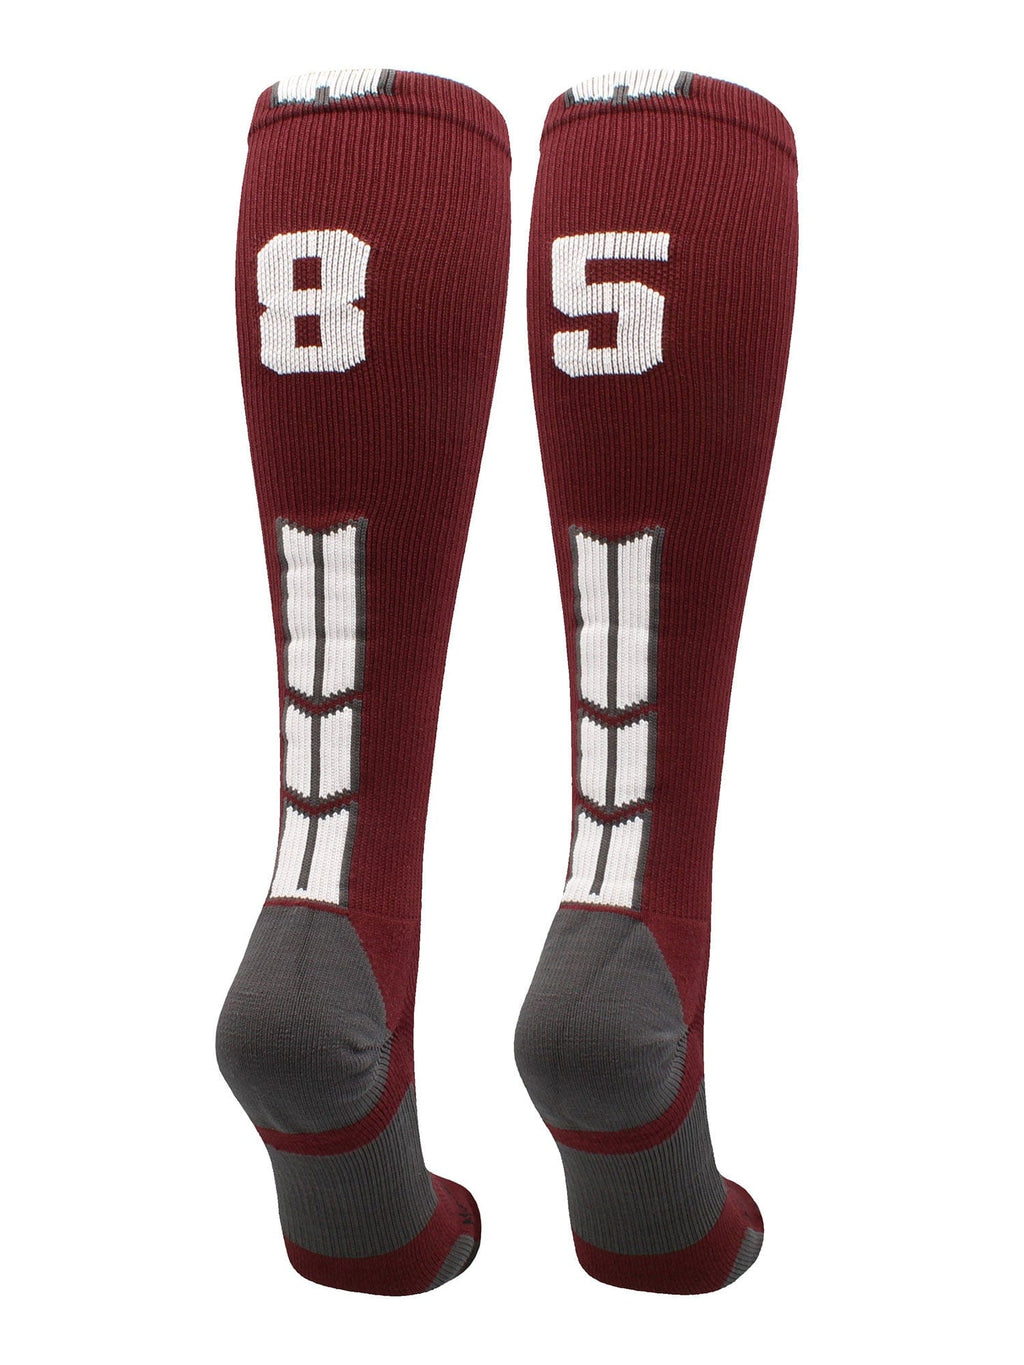 Player Id Jersey Number Socks Over the Calf Length Maroon and White ...